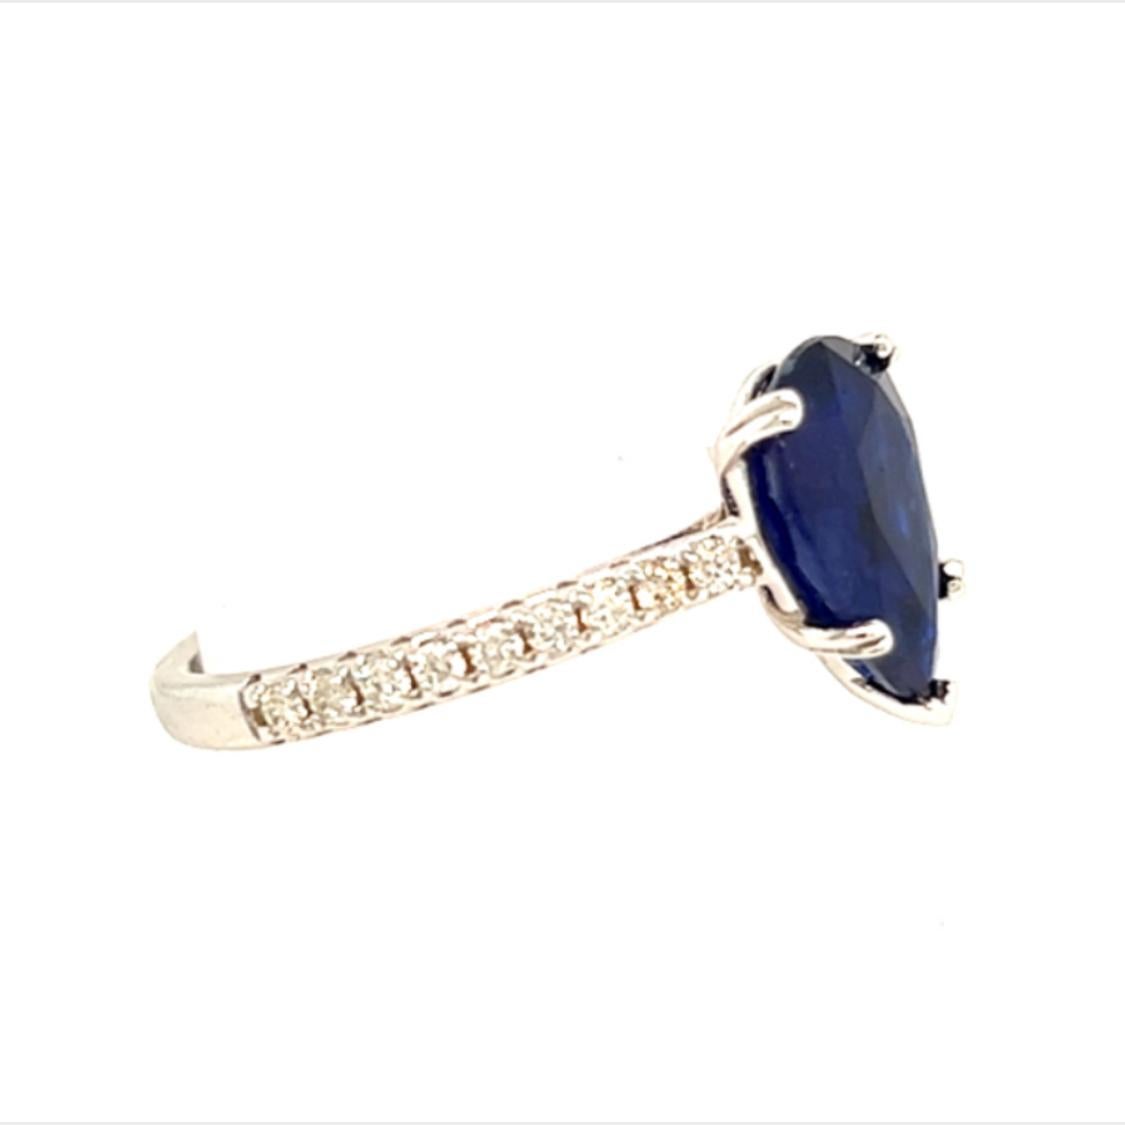 Pear Cut Sapphire Diamond Ring Size 6.5 14k Gold 2.77 TCW Certified For Sale